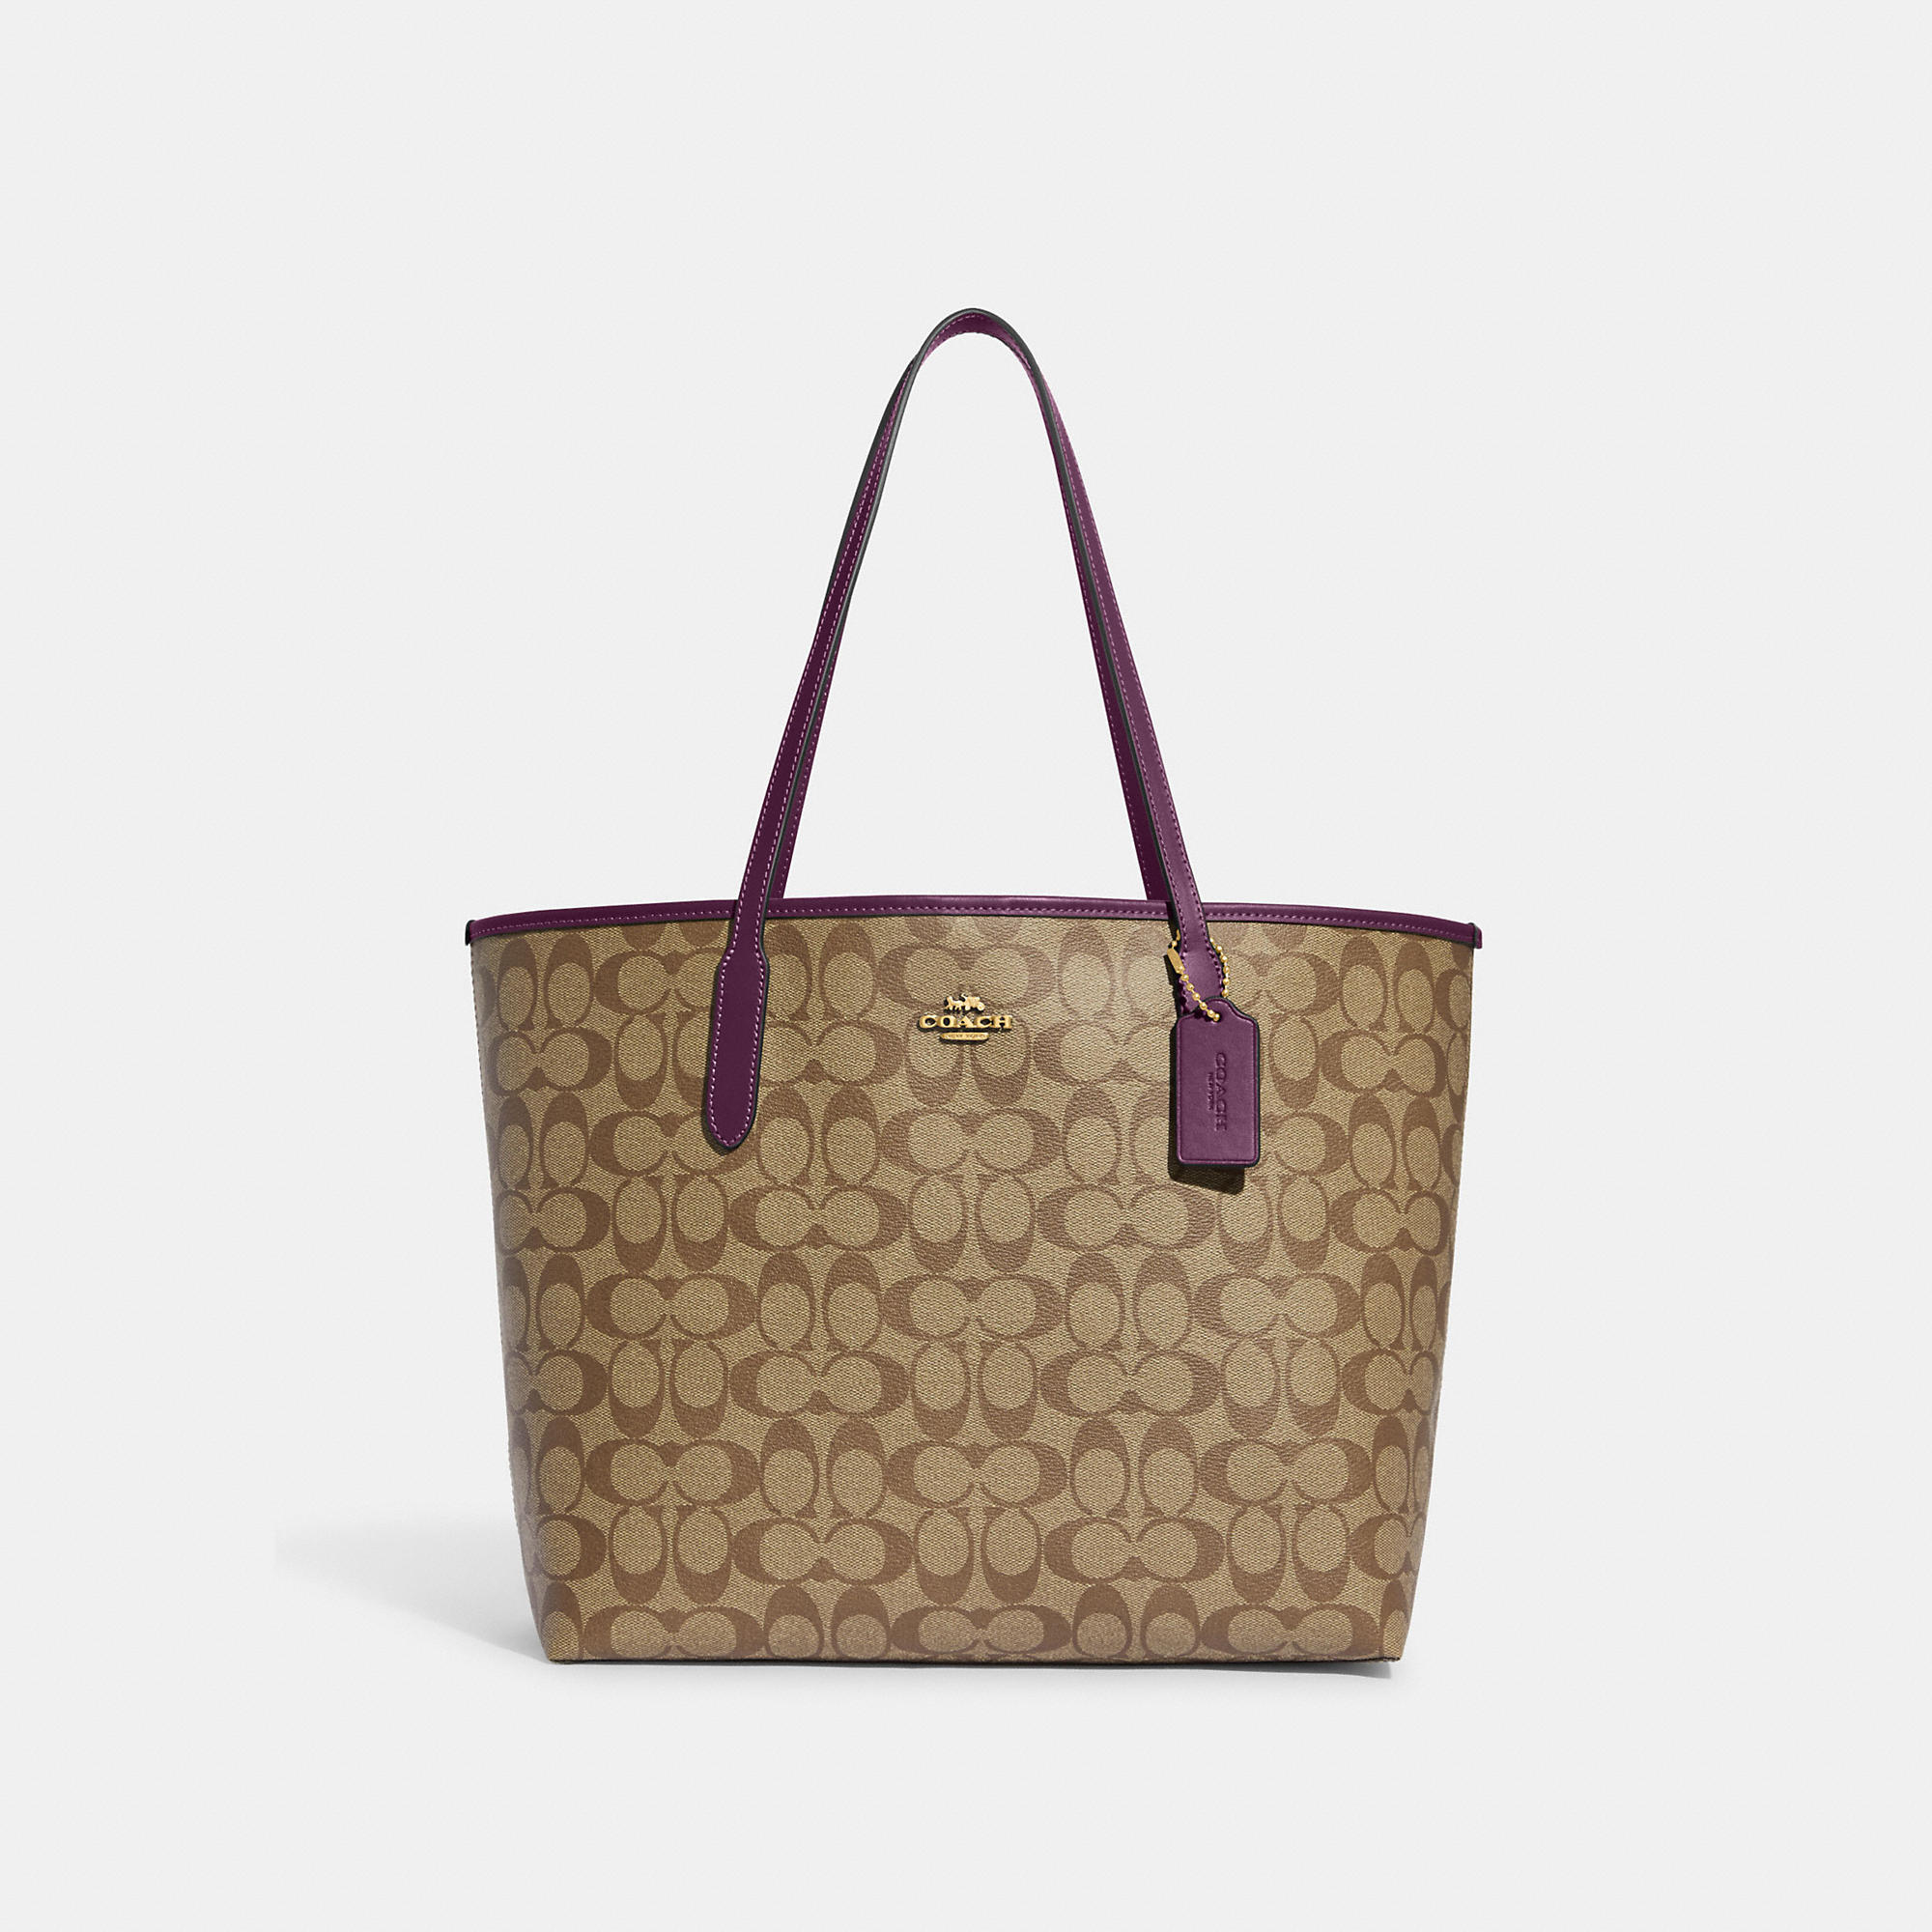 COACH OUTLET CITY TOTE IN SIGNATURE CANVAS